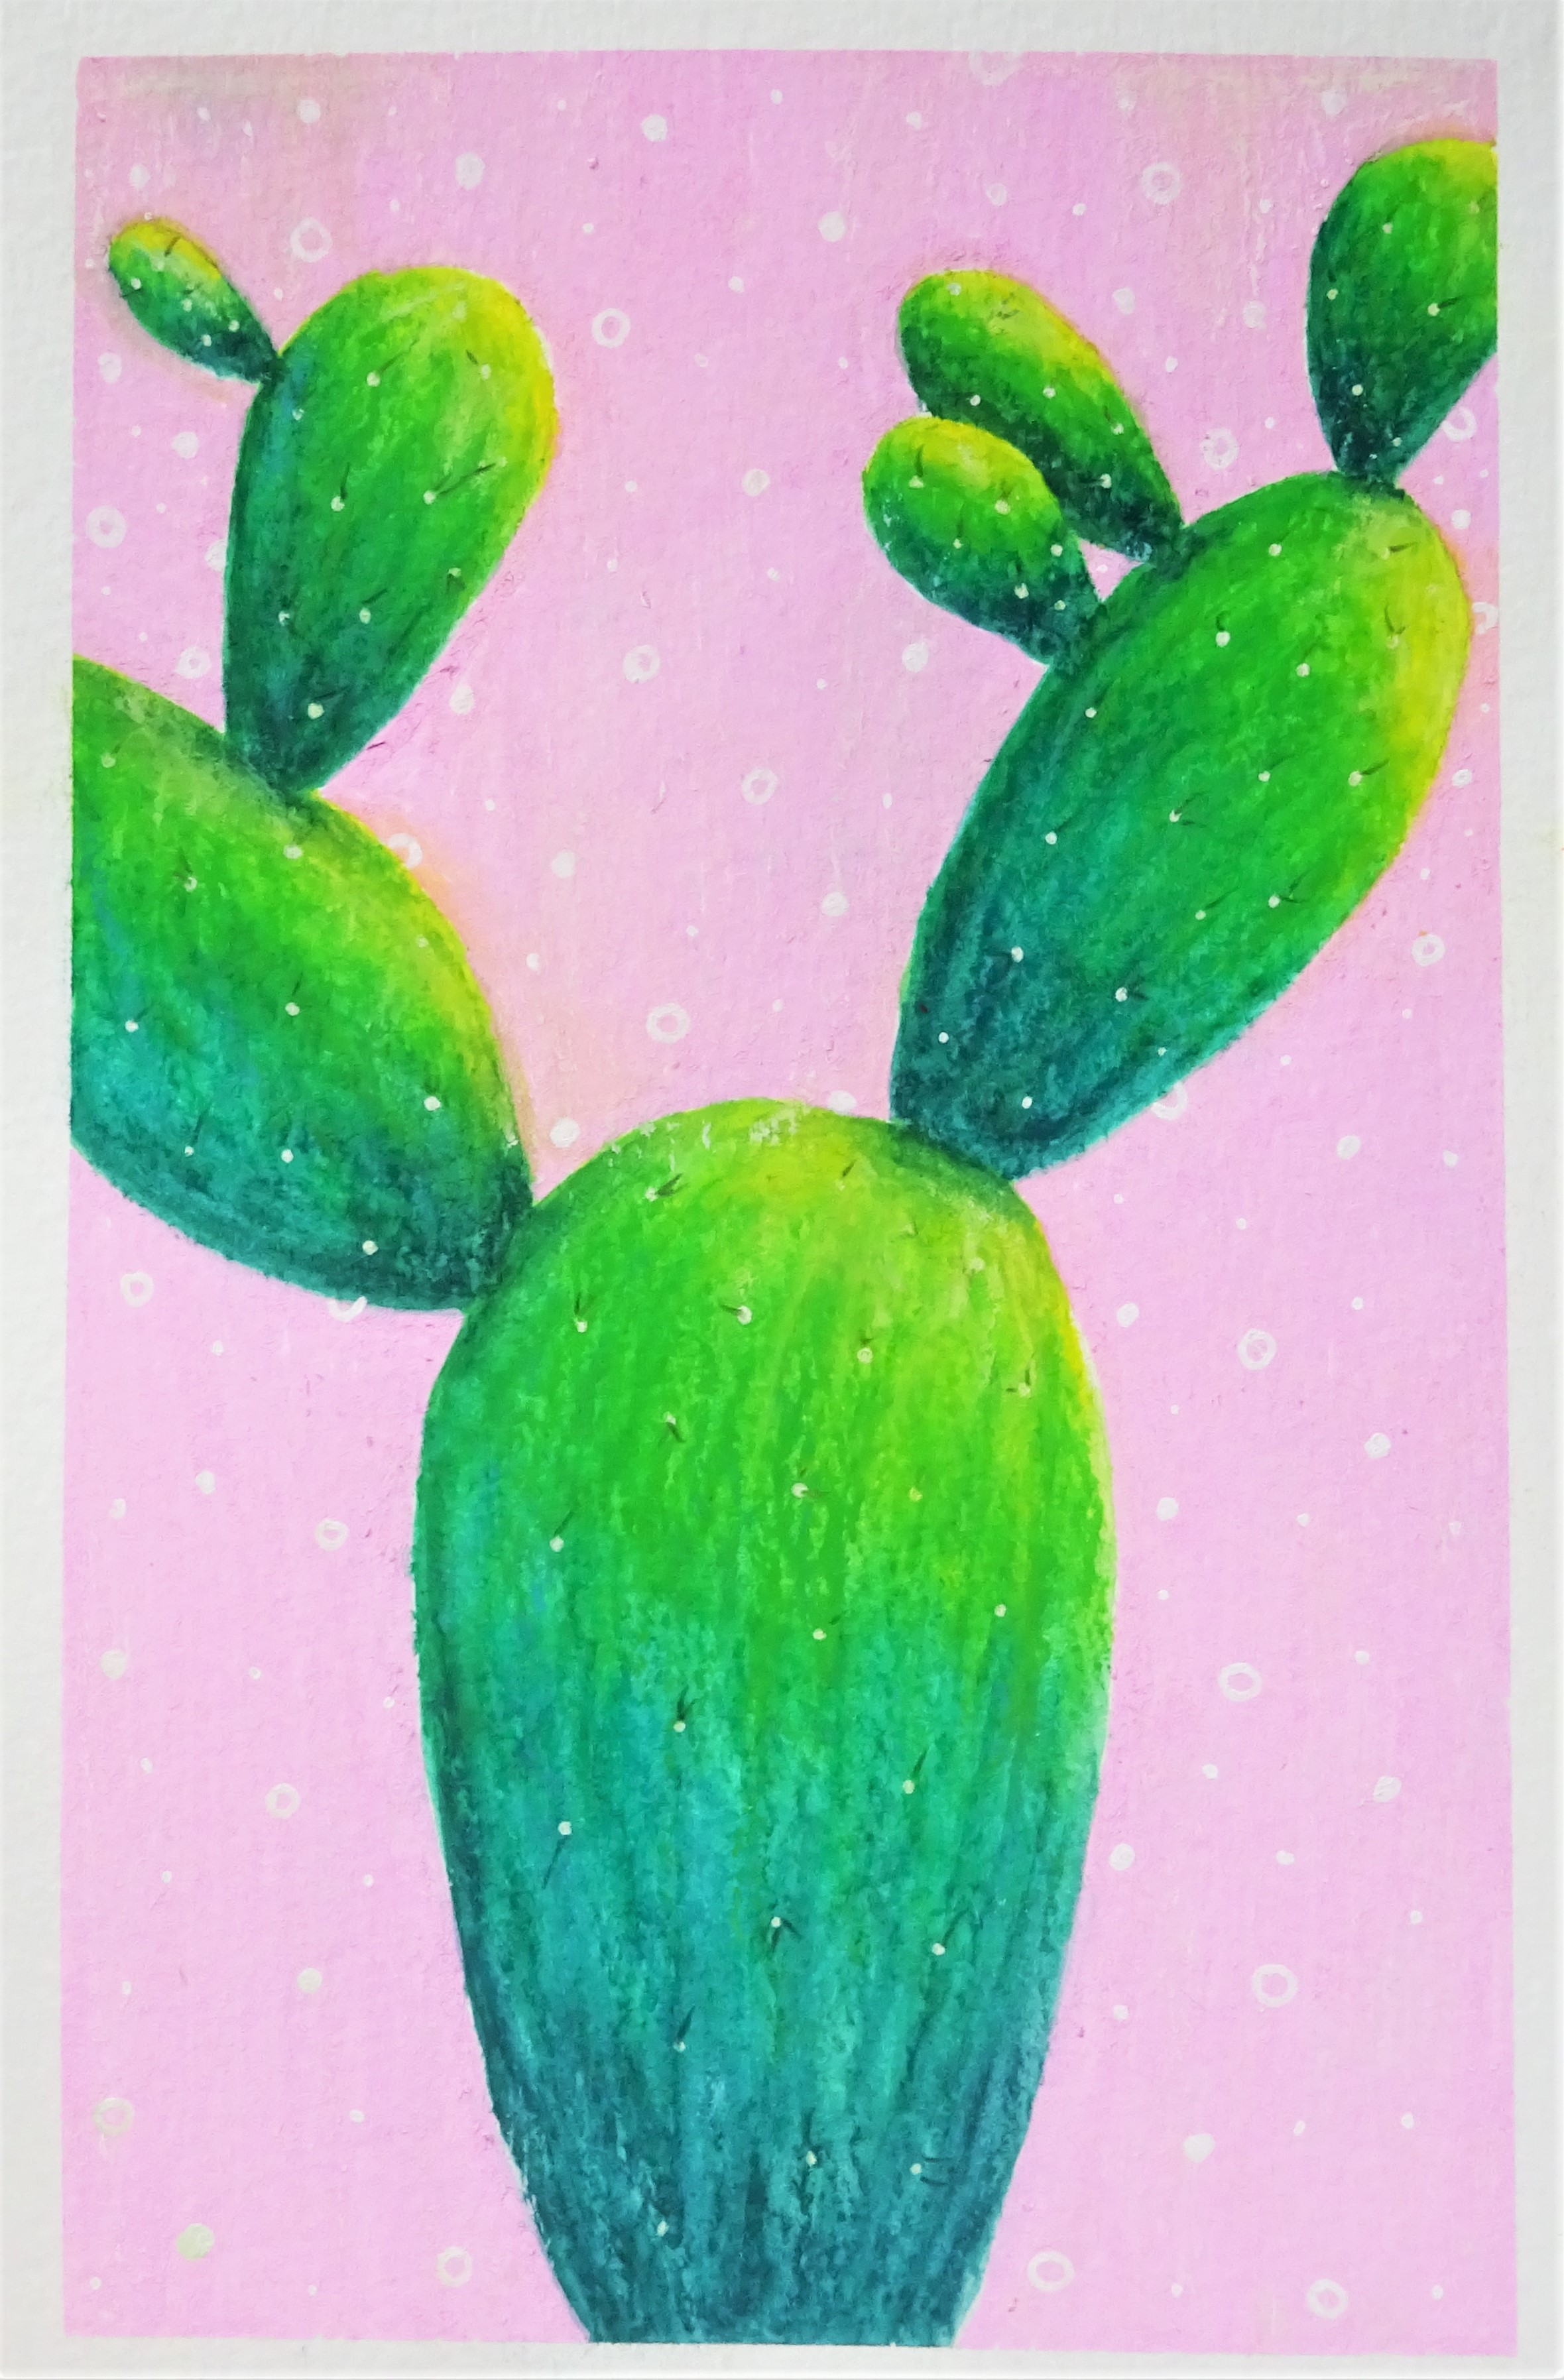 Prima art philosophy water soluble oil pastel cactus illustration / How to use water soluble oil pastel